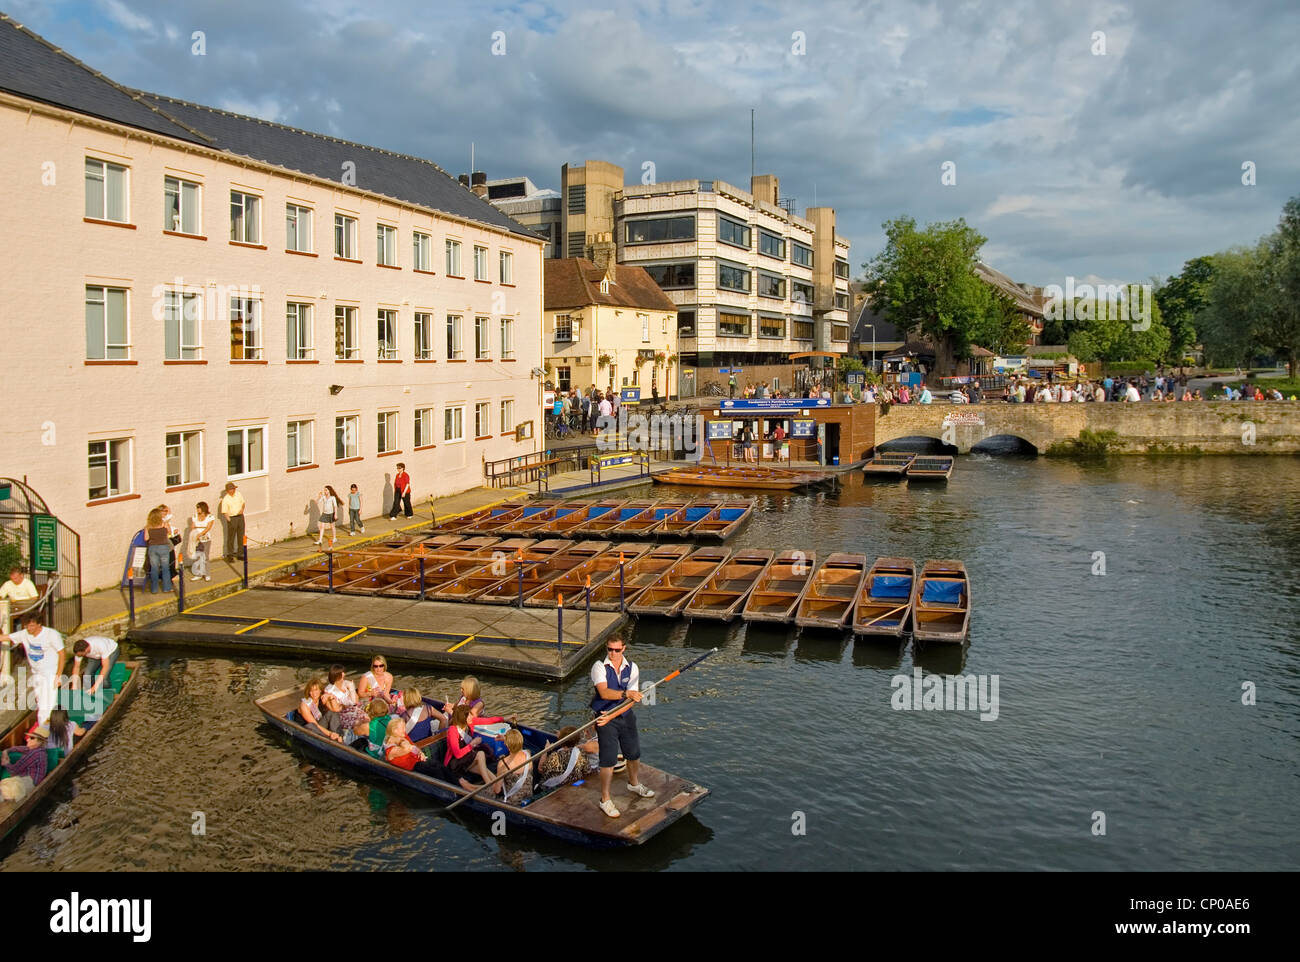 Students punting on the River Cam, Cambridge, England Stock Photo